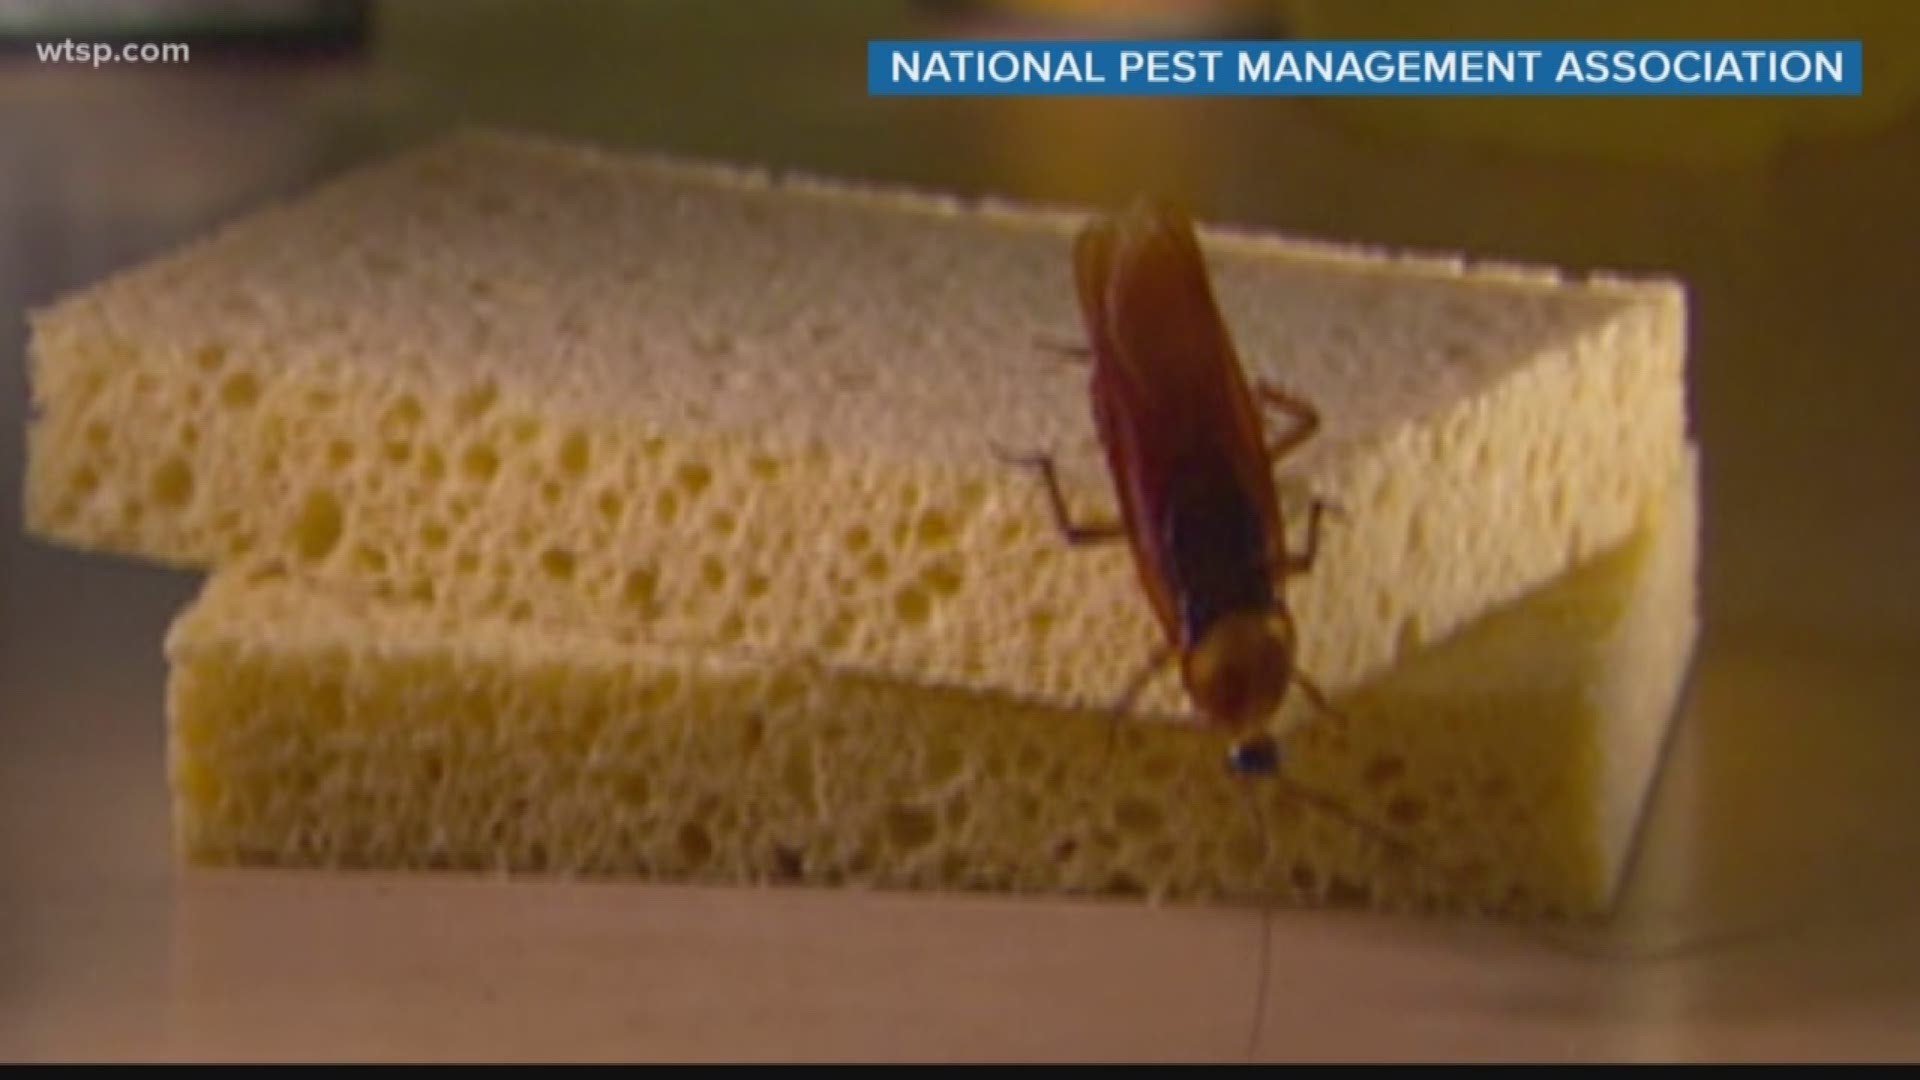 There's a greater risk of seeing bugs and rodents in our homes earlier than usual.